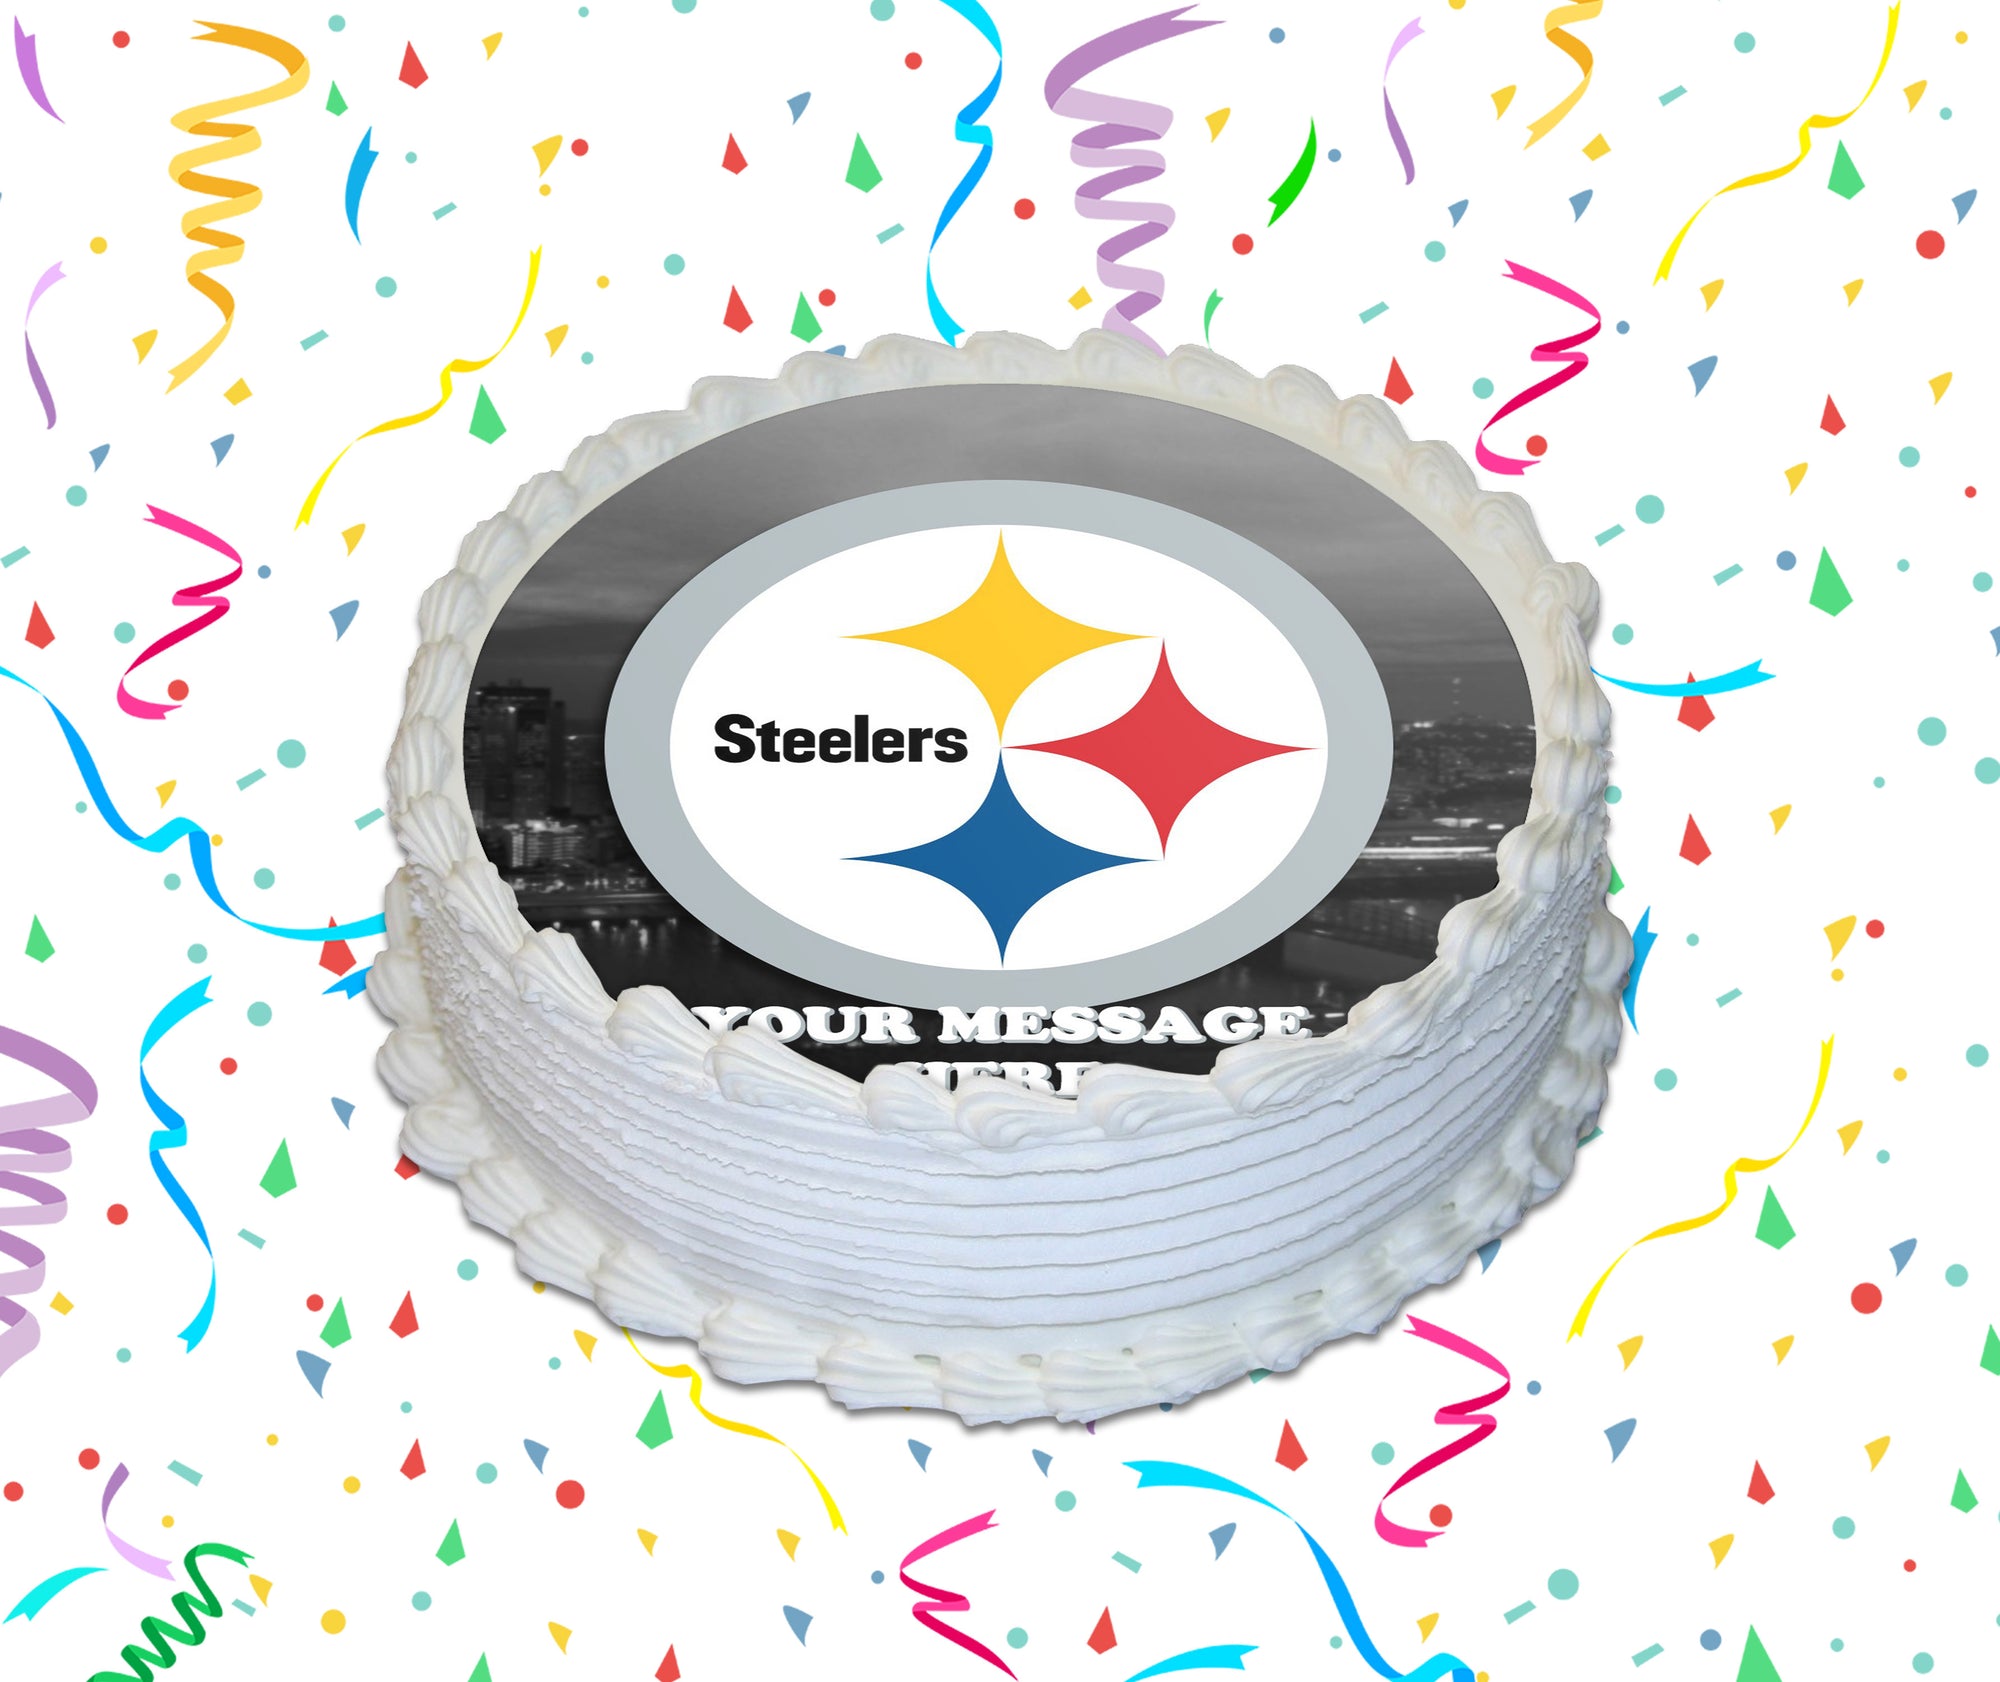 Pittsburg Steelers Cake | Please let me know what you think … | Flickr